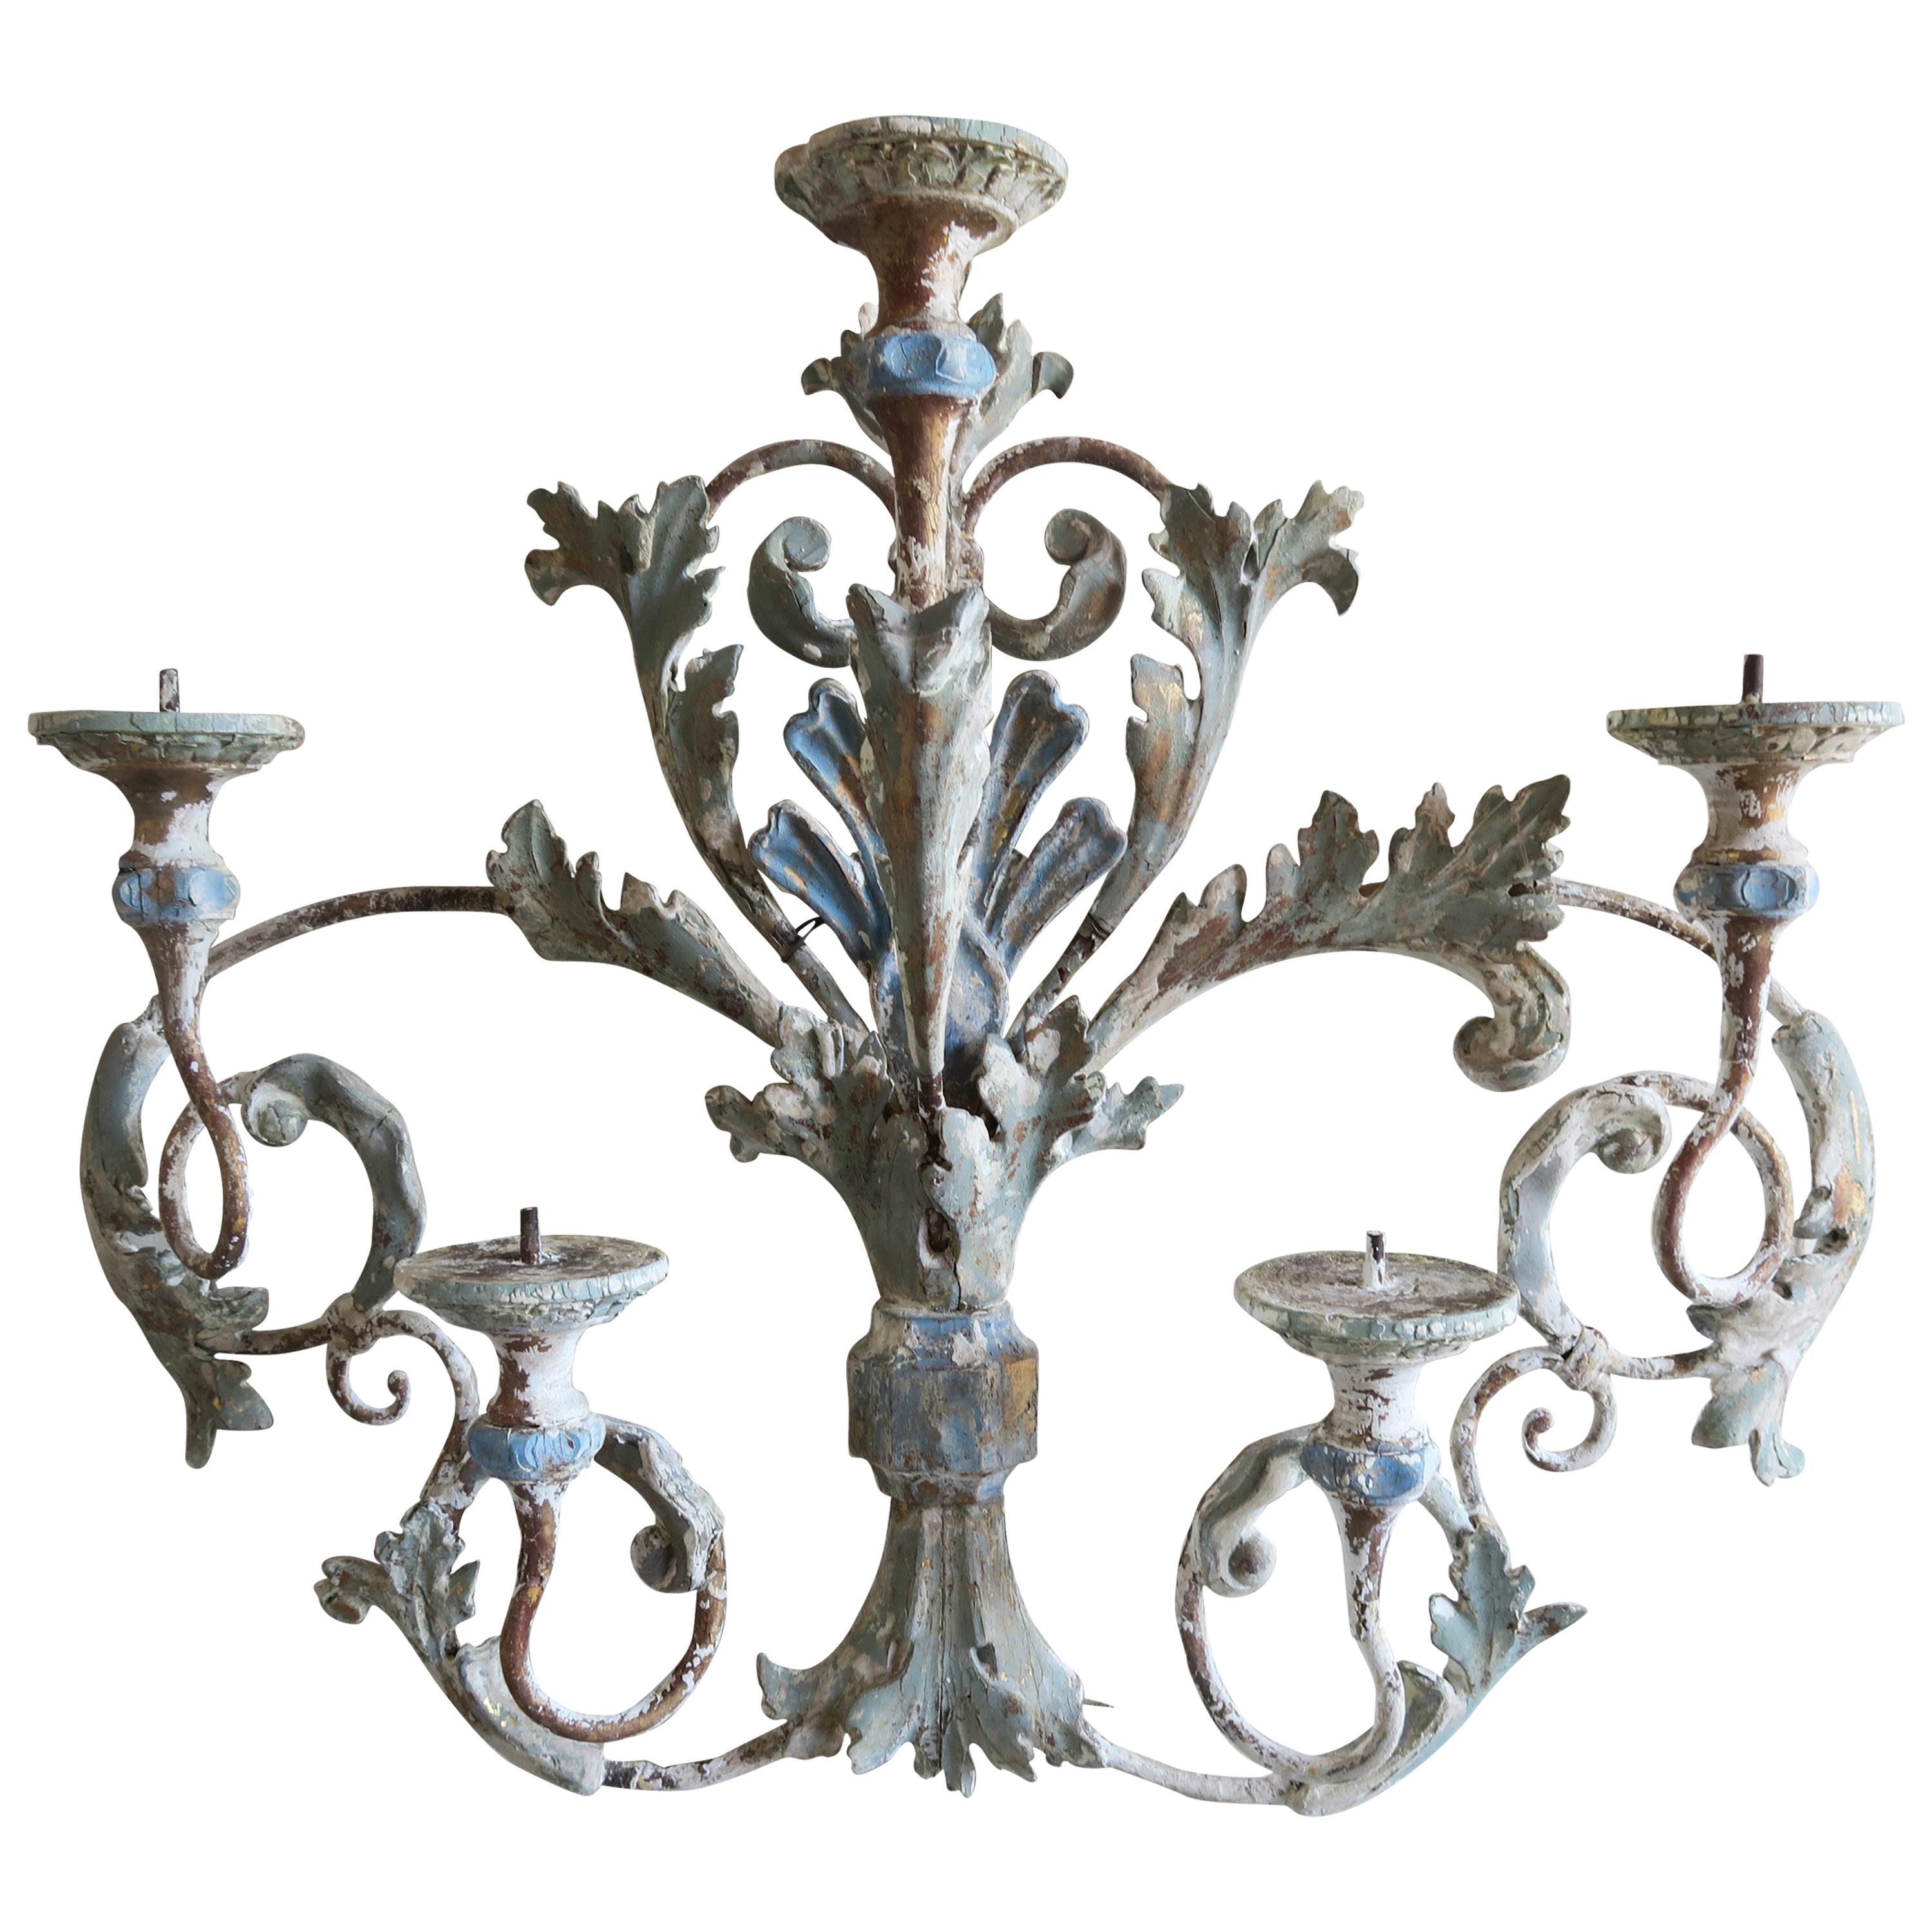 Italian Painted Iron and Wood Acanthus Leaf Wall Decor